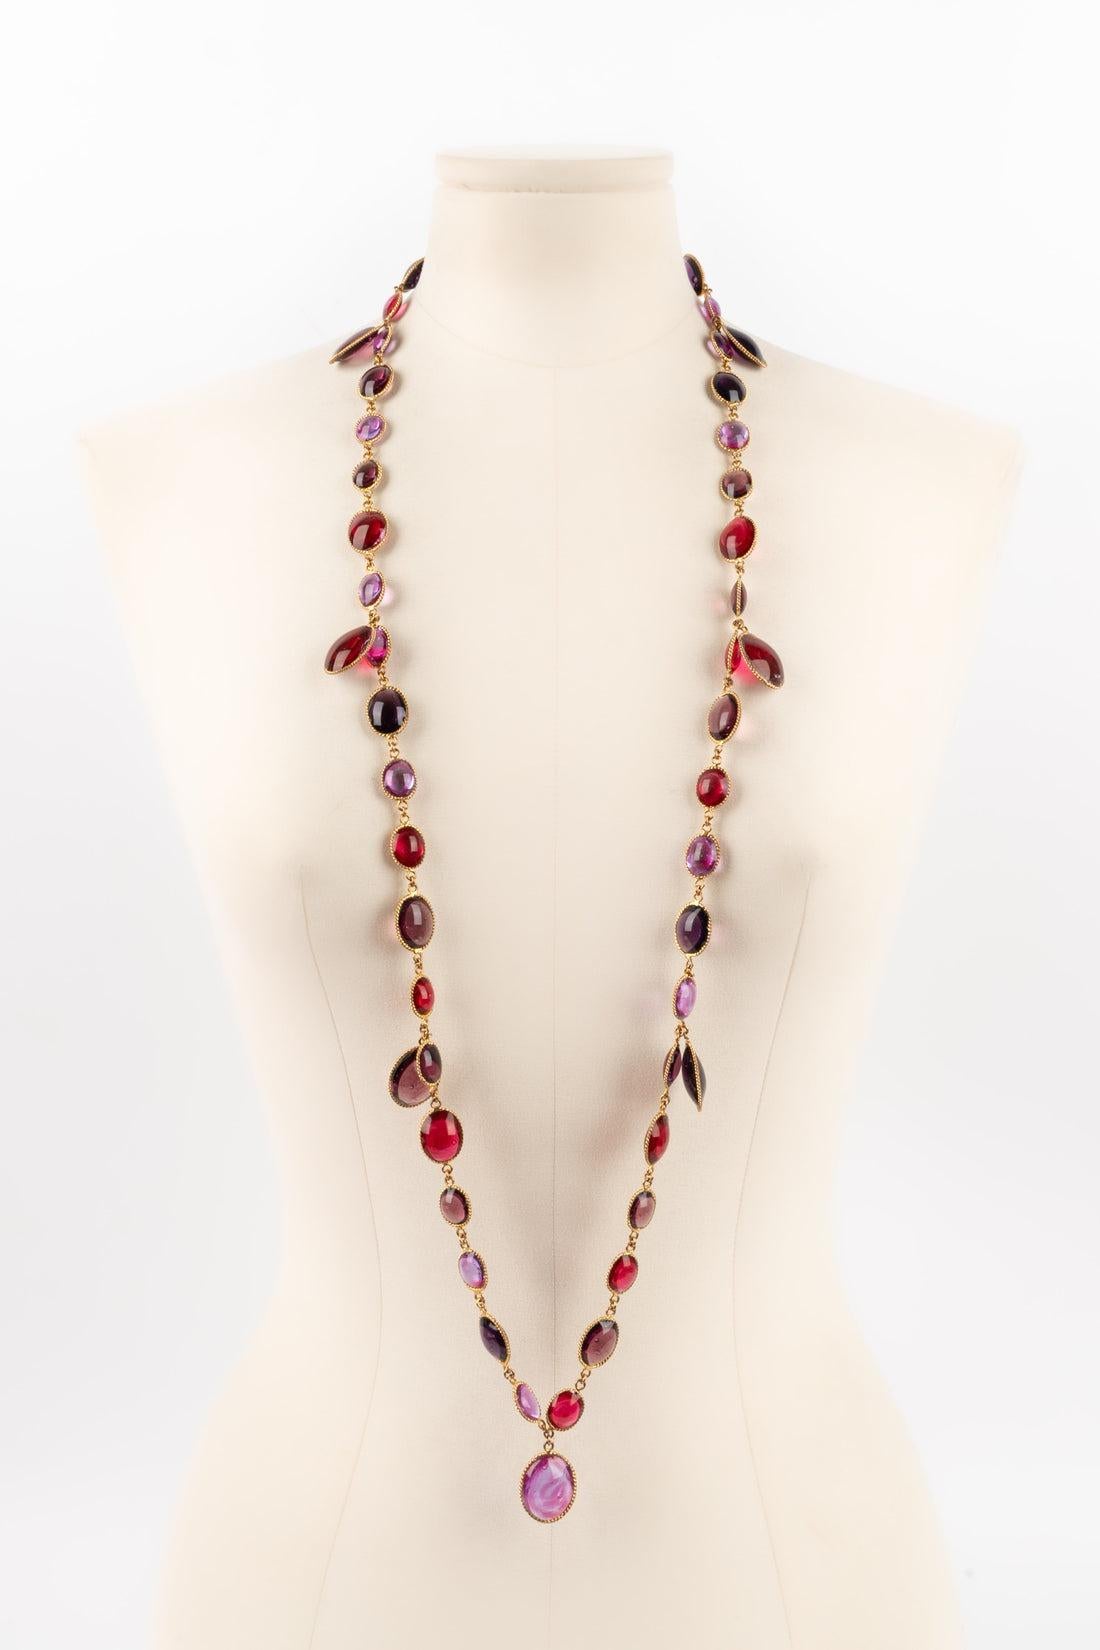 Gripoix - Necklace in gold-plated metal and glass paste in red, pink, and purple tones. Work from the Gripoix Atelier from the 1980s.

Additional information:
Condition: Very good condition
Dimensions: Length: 101 cm
Period: 20th Century

Seller